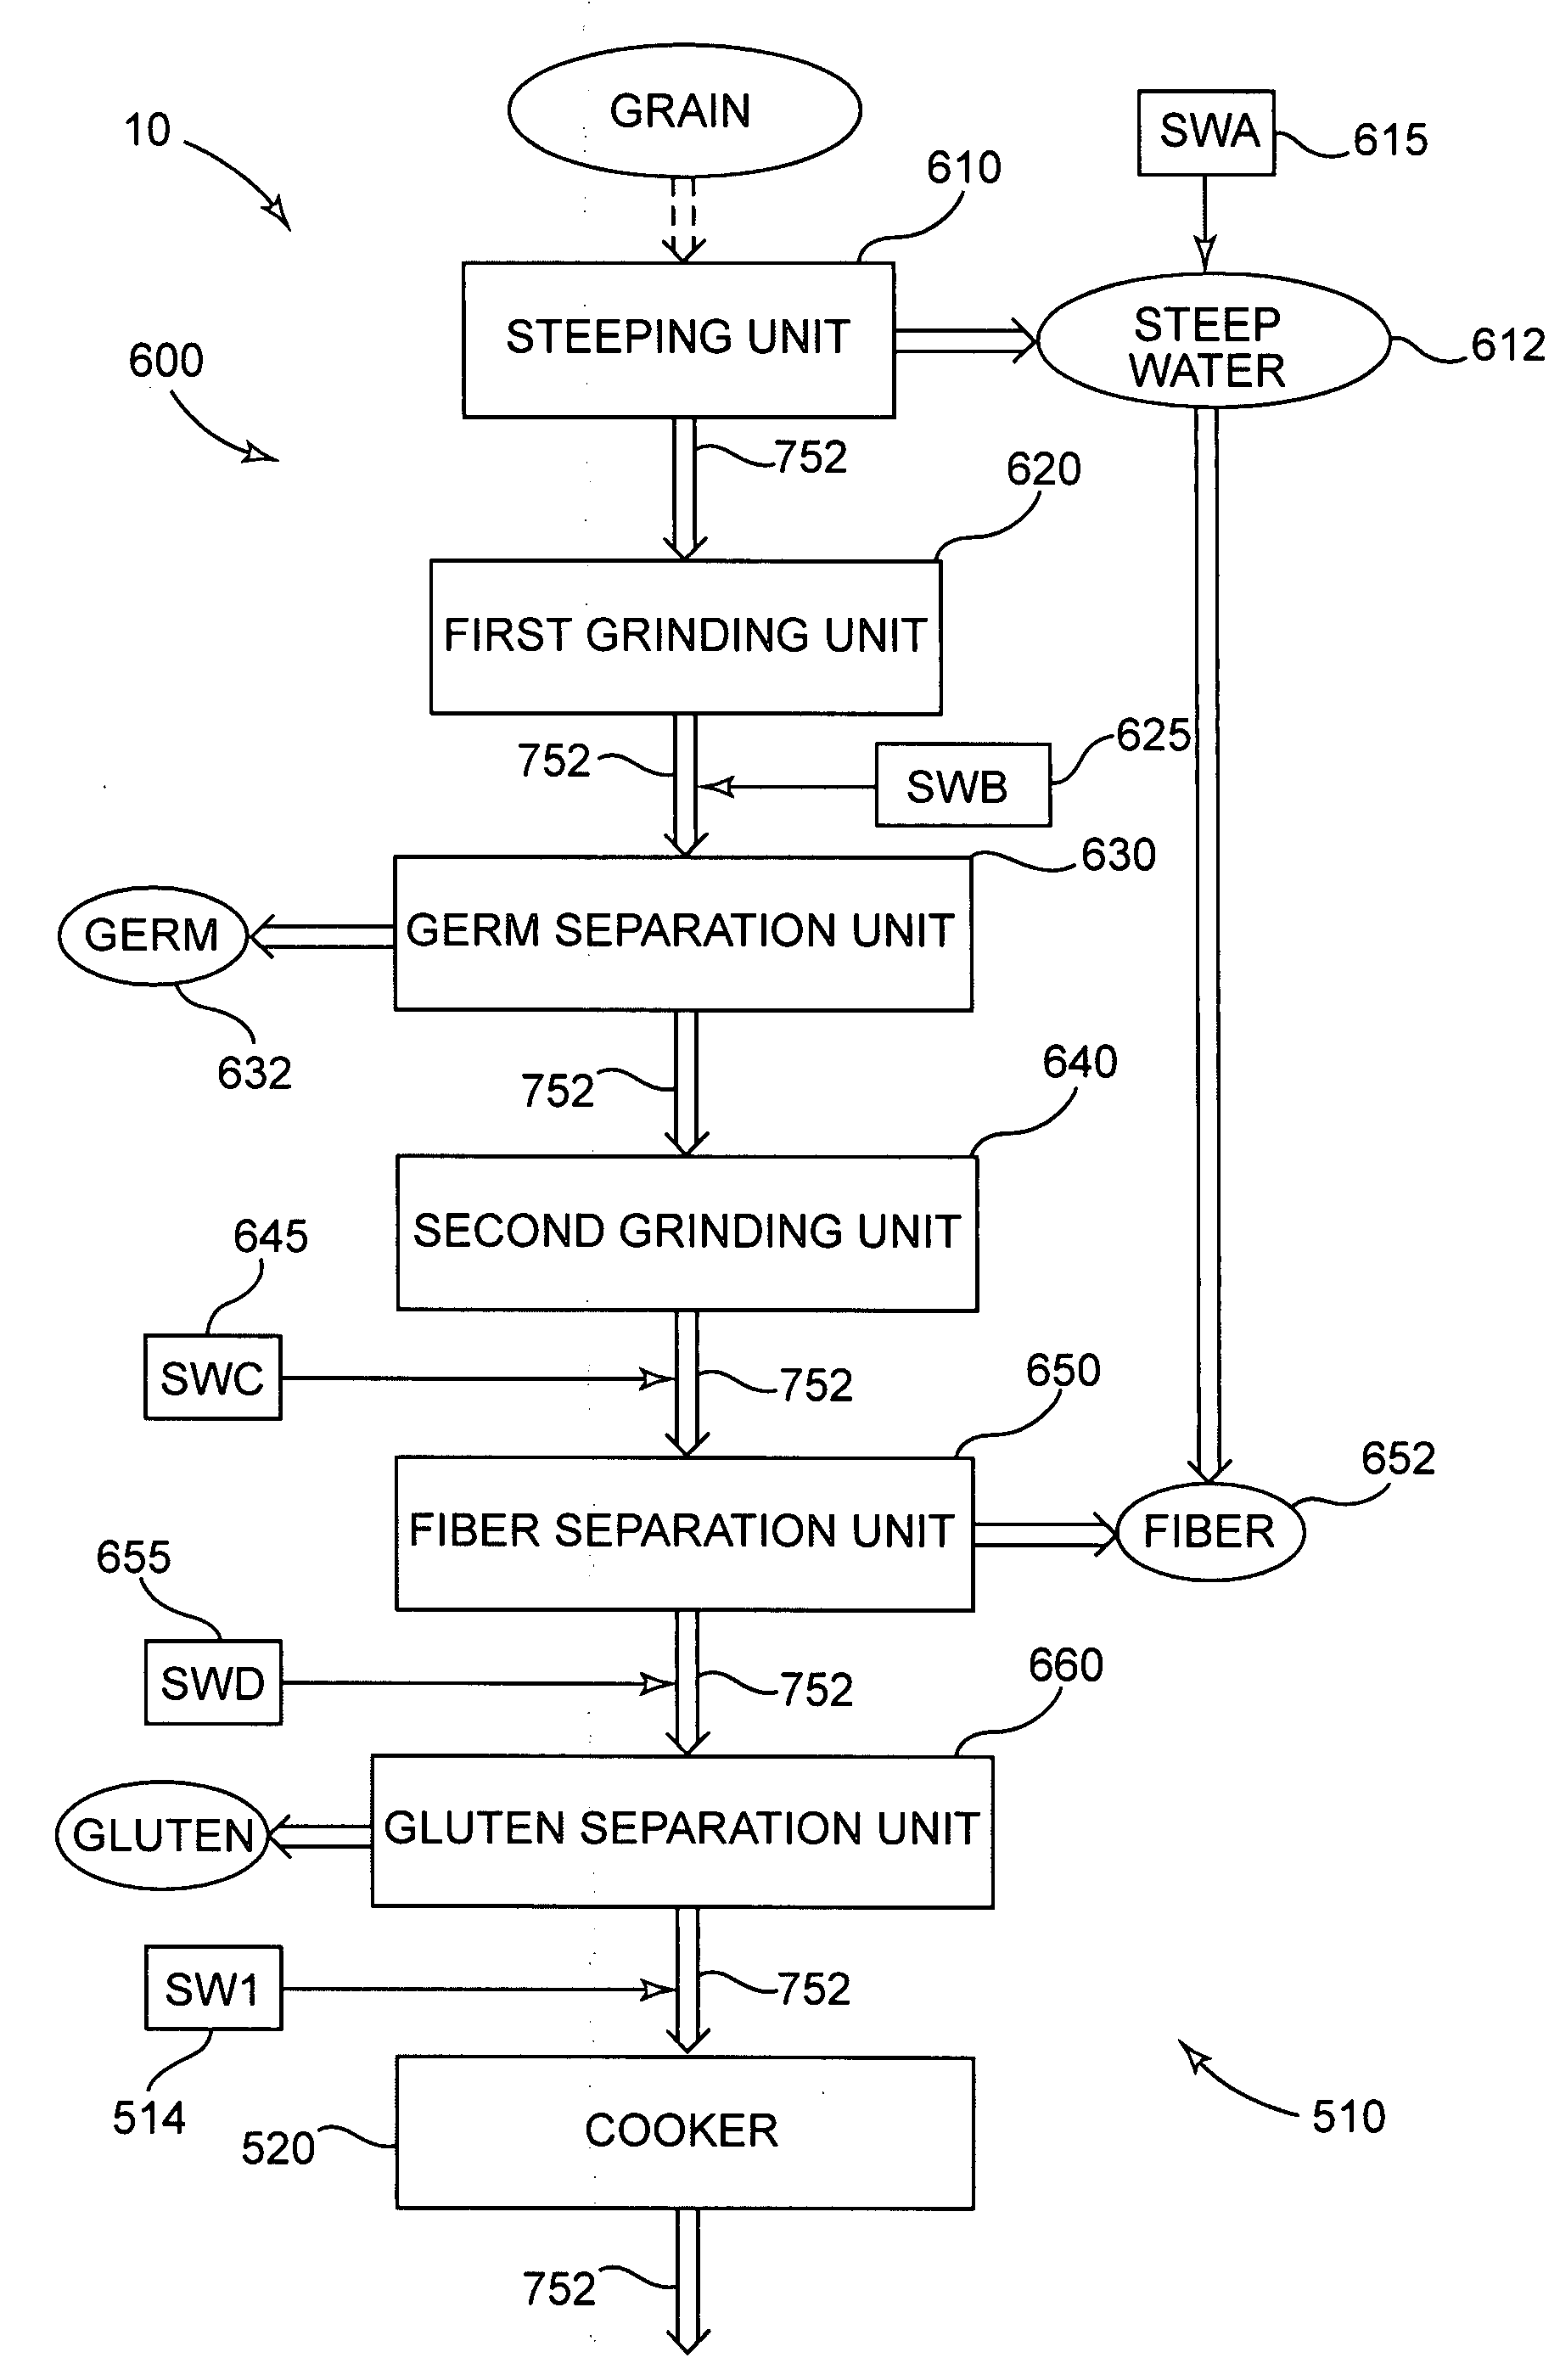 Shock wave apparatus and methods for ethanol production